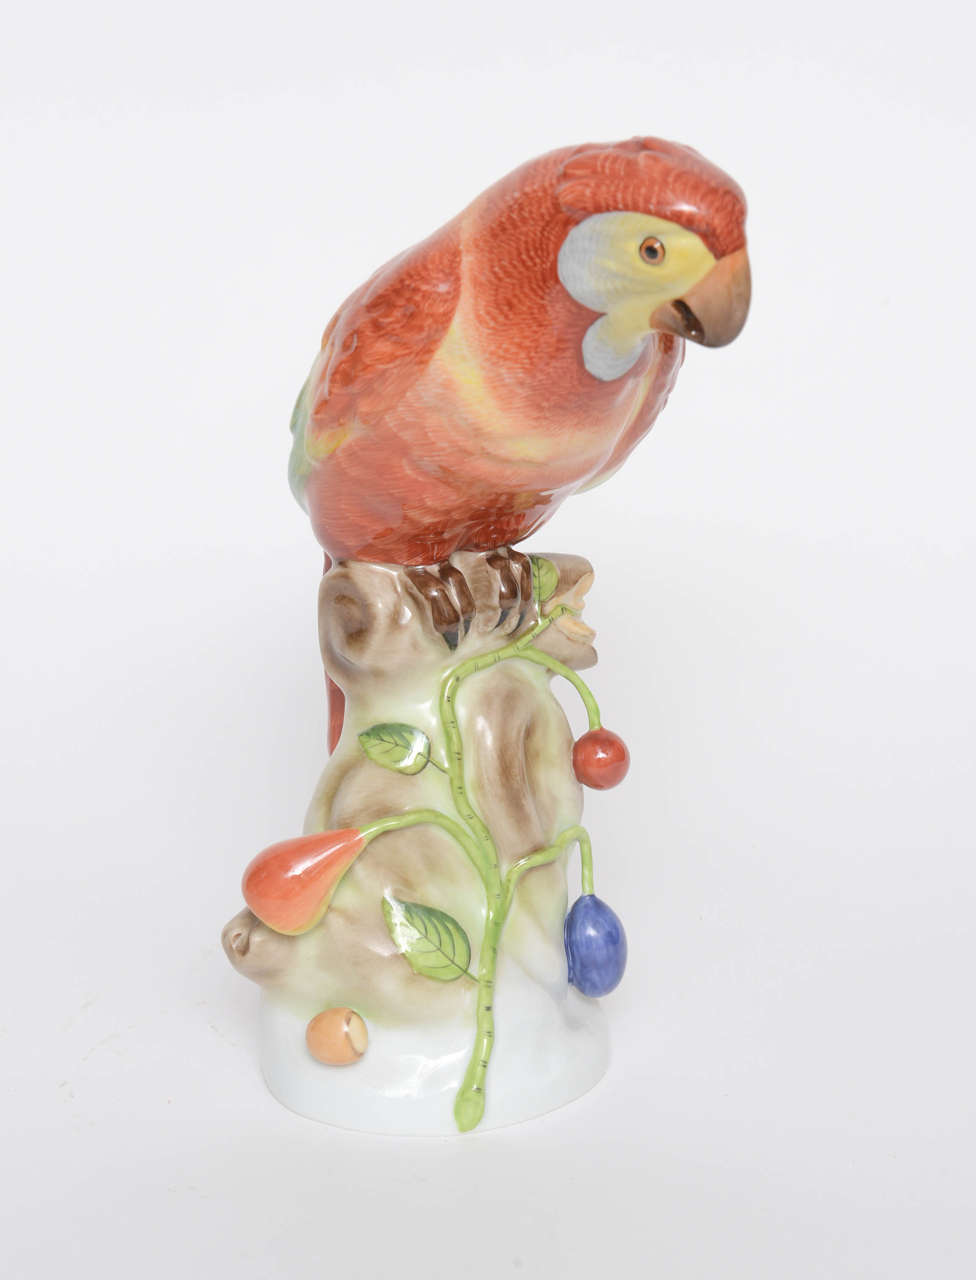 Rare parrot figurine from this world reknown company.  Beautifully executed with great detail

Originally $ 950.00

PLEASE VISIT OUR SITE FOR ADDITIONAL SALE TIMES